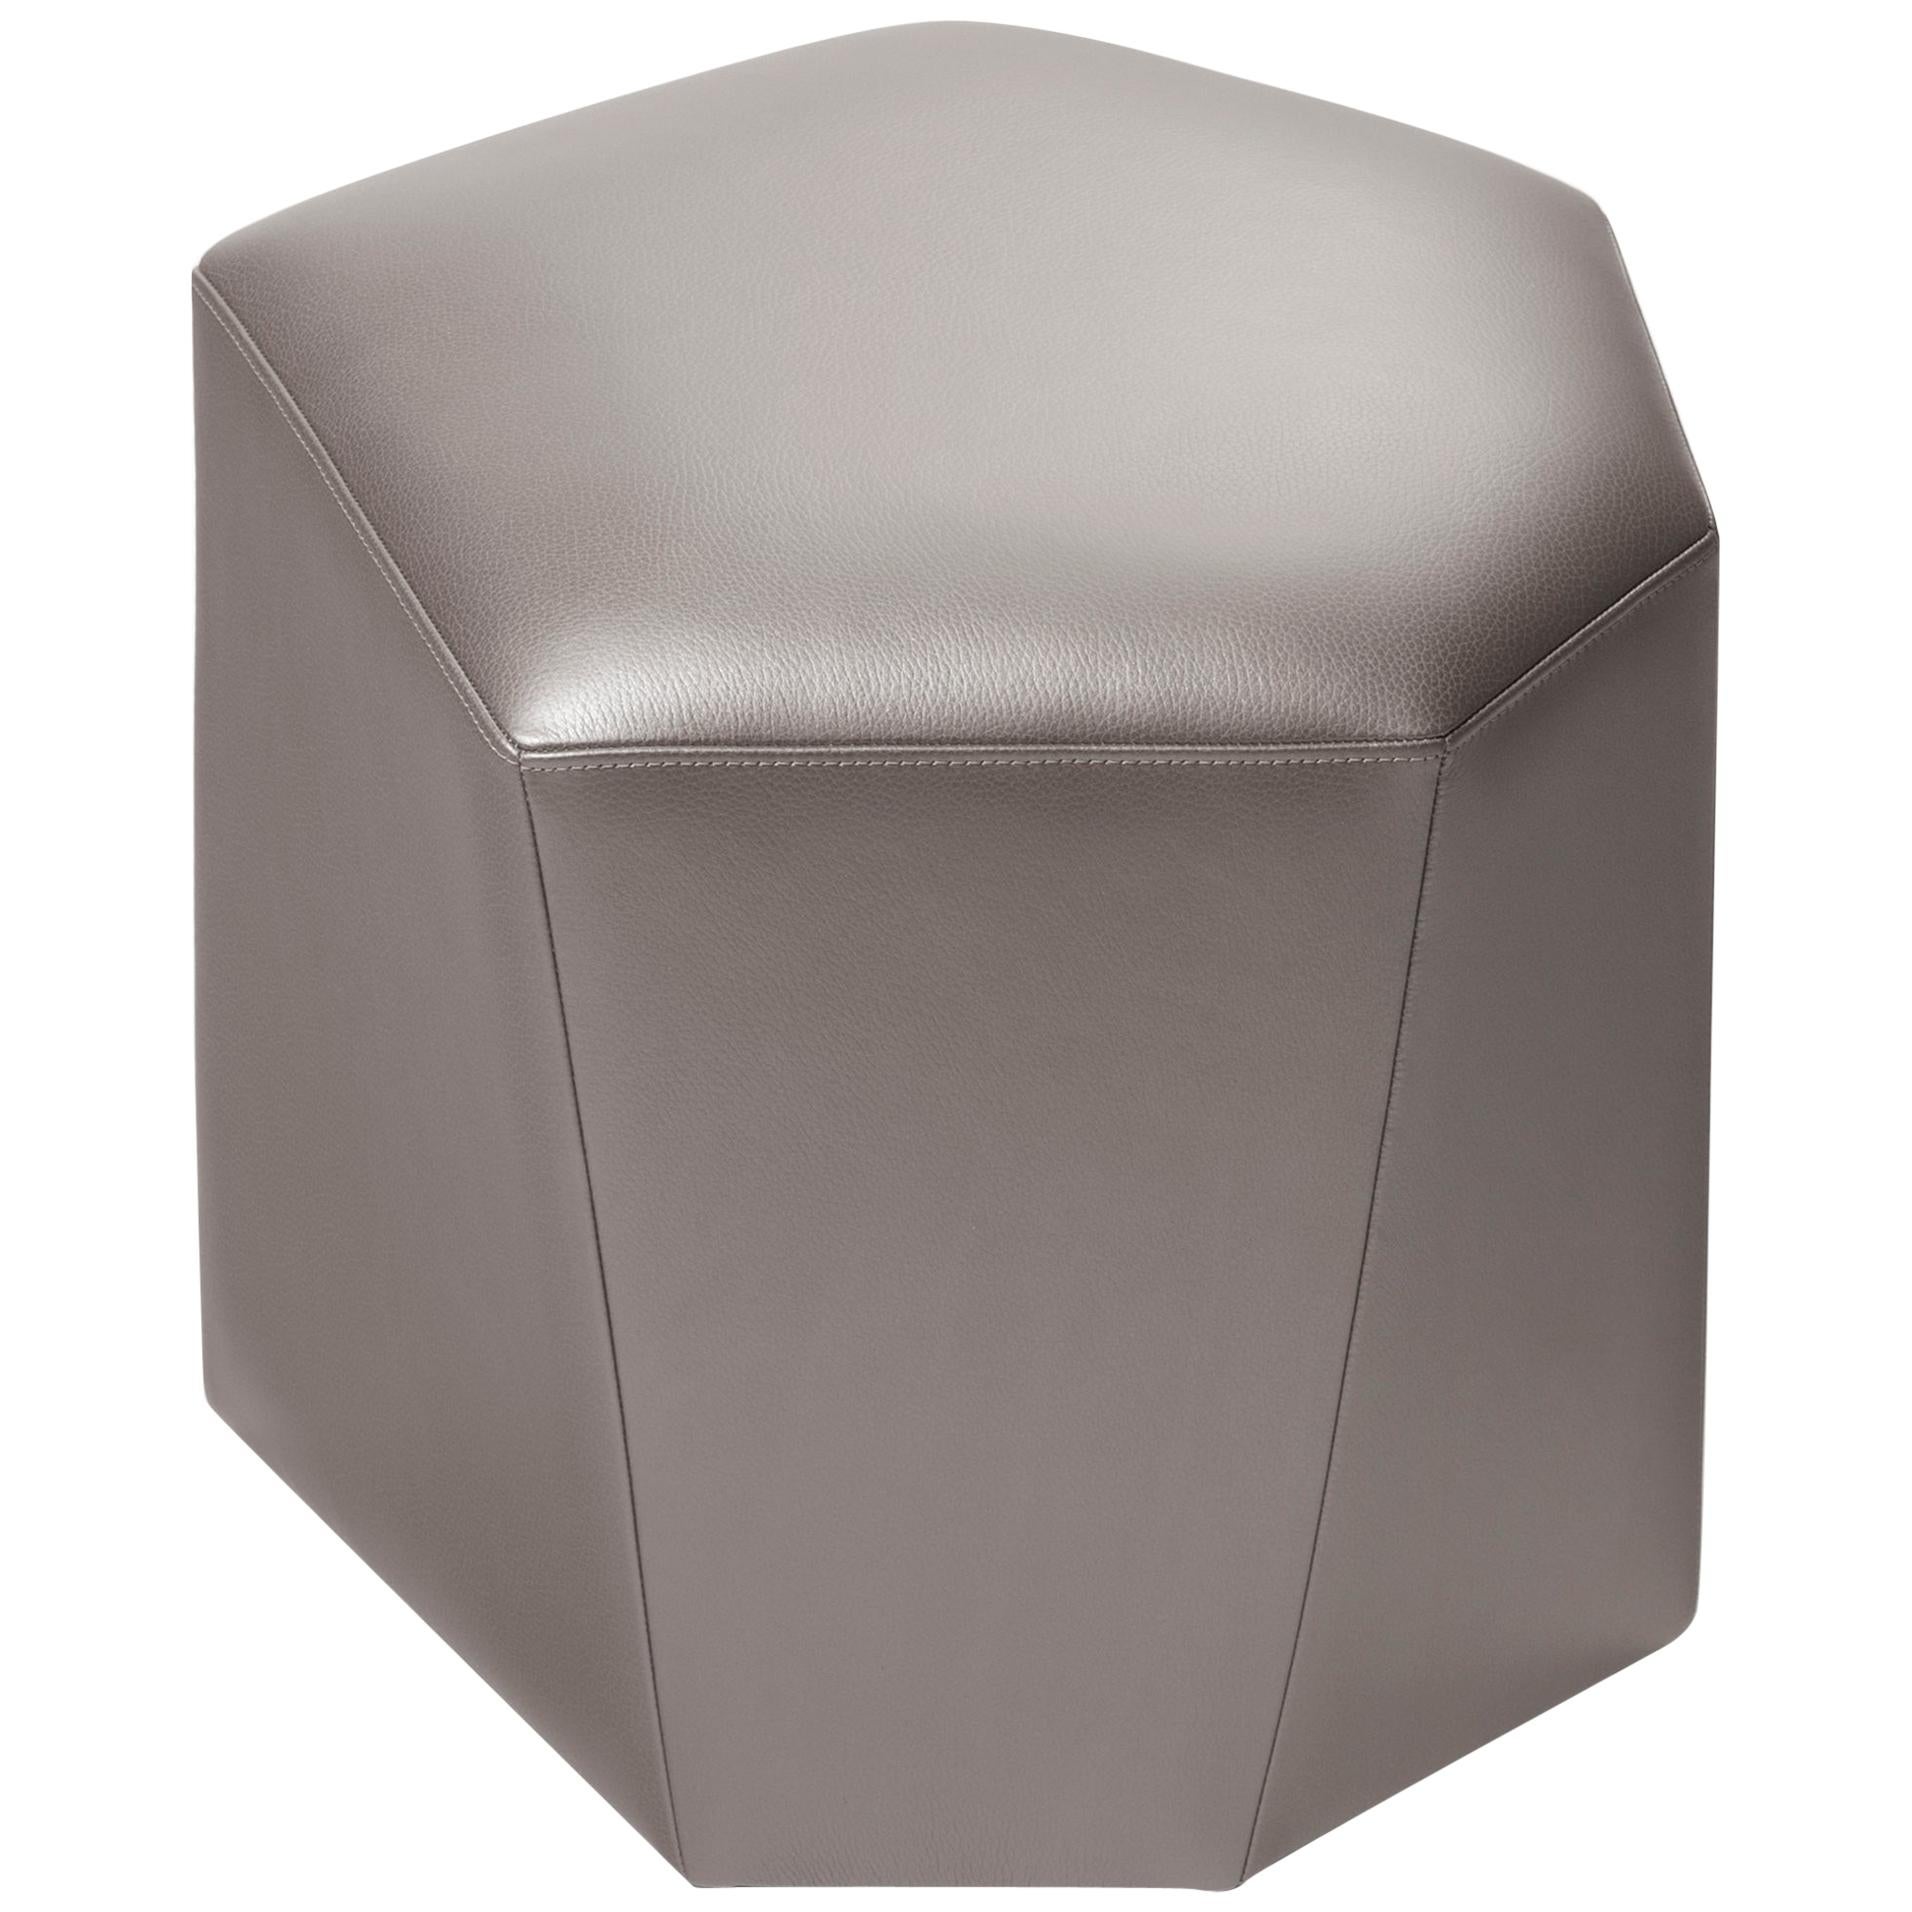 HOLLY HUNT Vrille Ottoman in Argento Leather